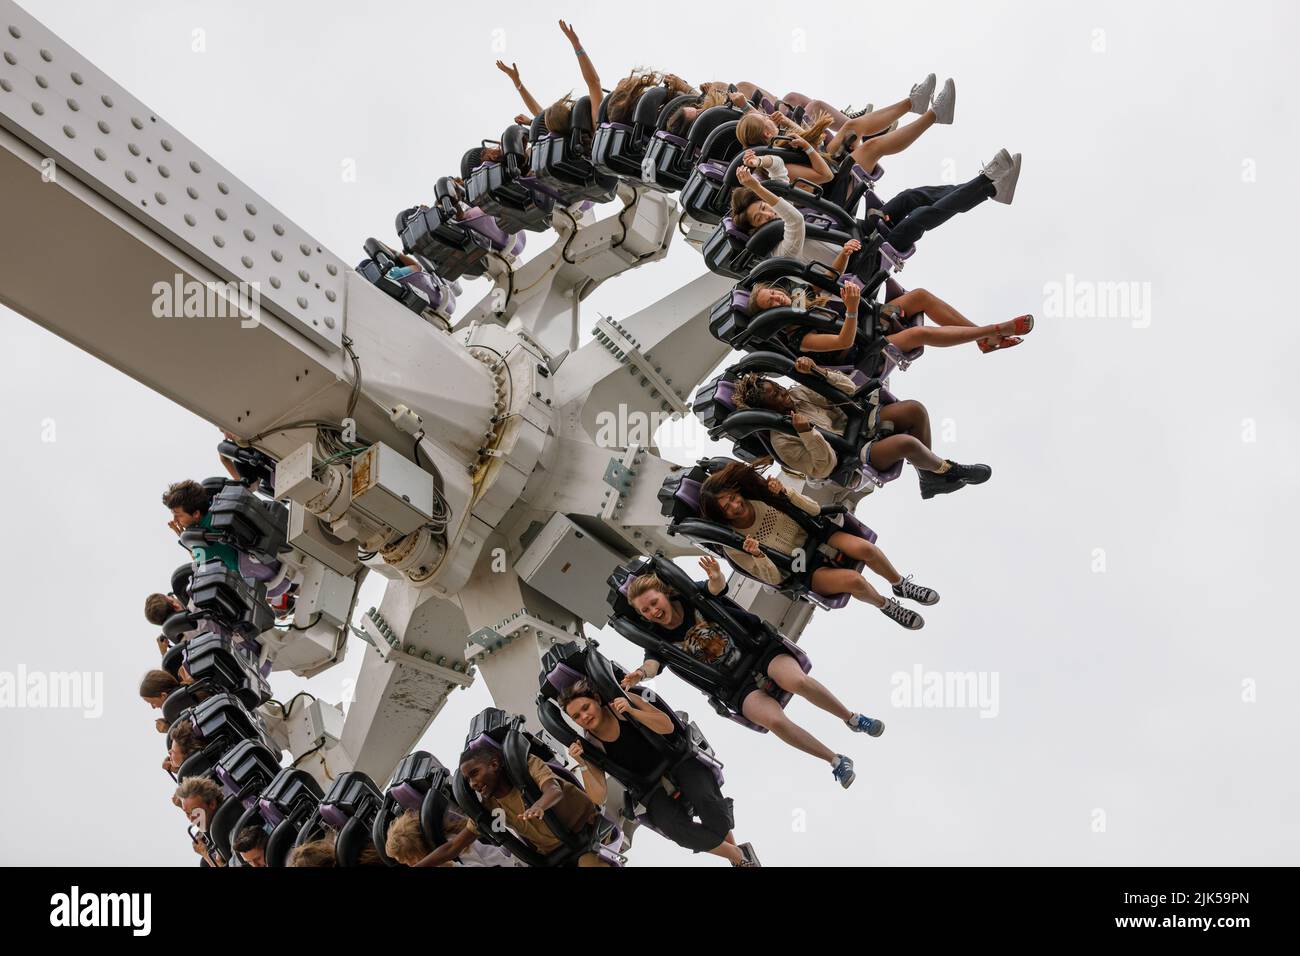 A pendulum ride with young people, legs dangling, arms in the air, smiling and excited Stock Photo